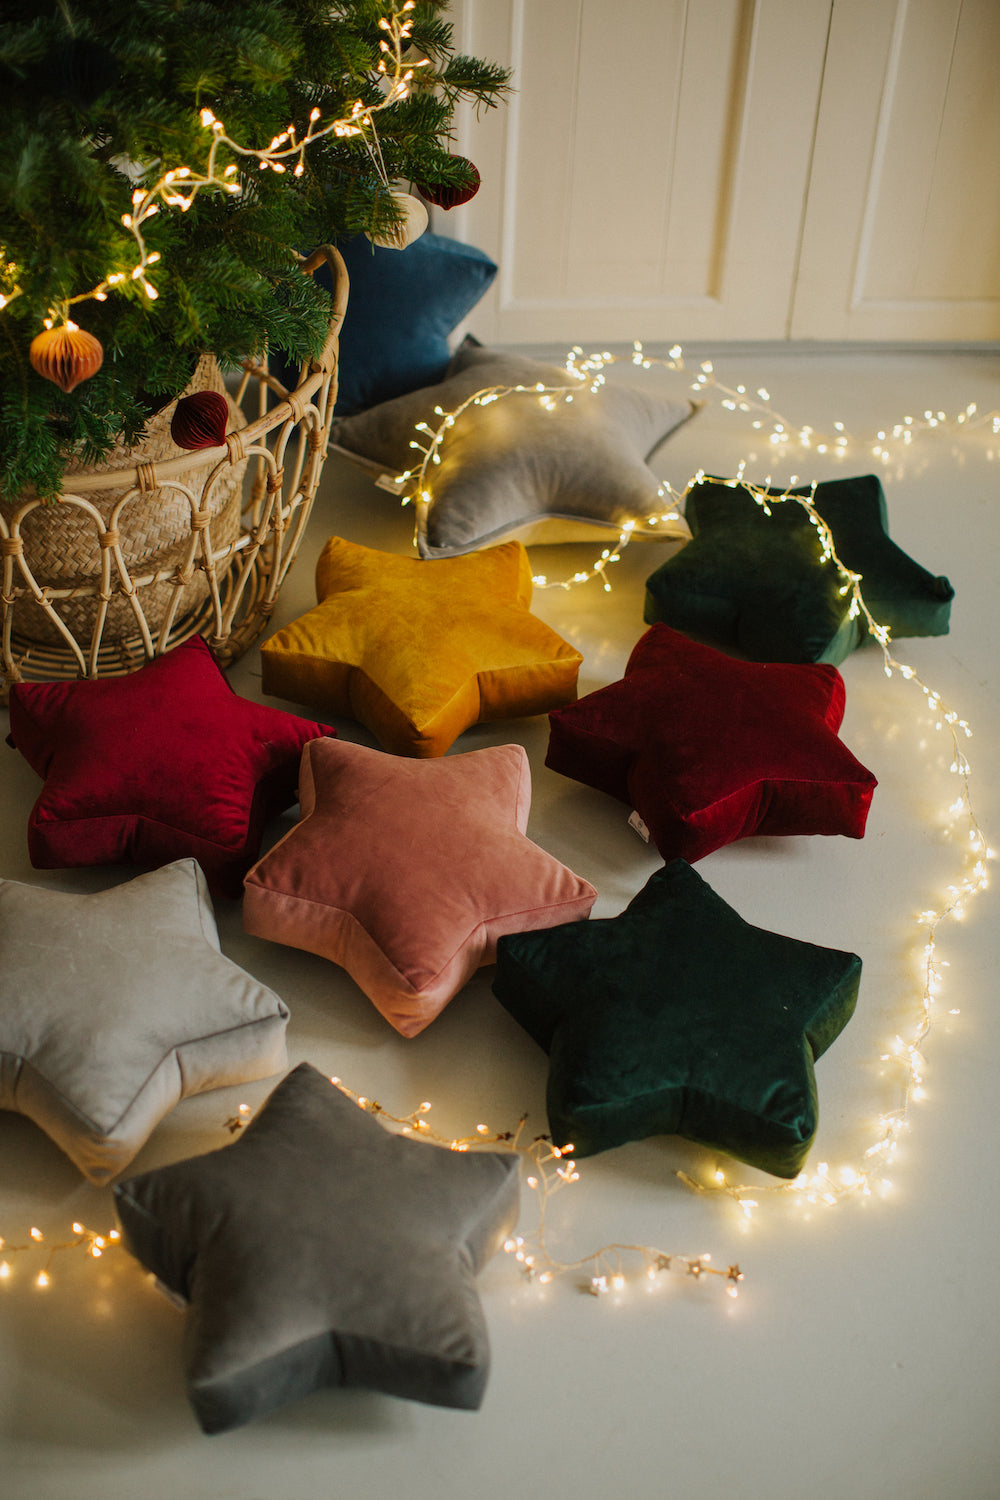 Small star cushion green by bettys home. Kids room wall decoration with other star cushion under christmas tree